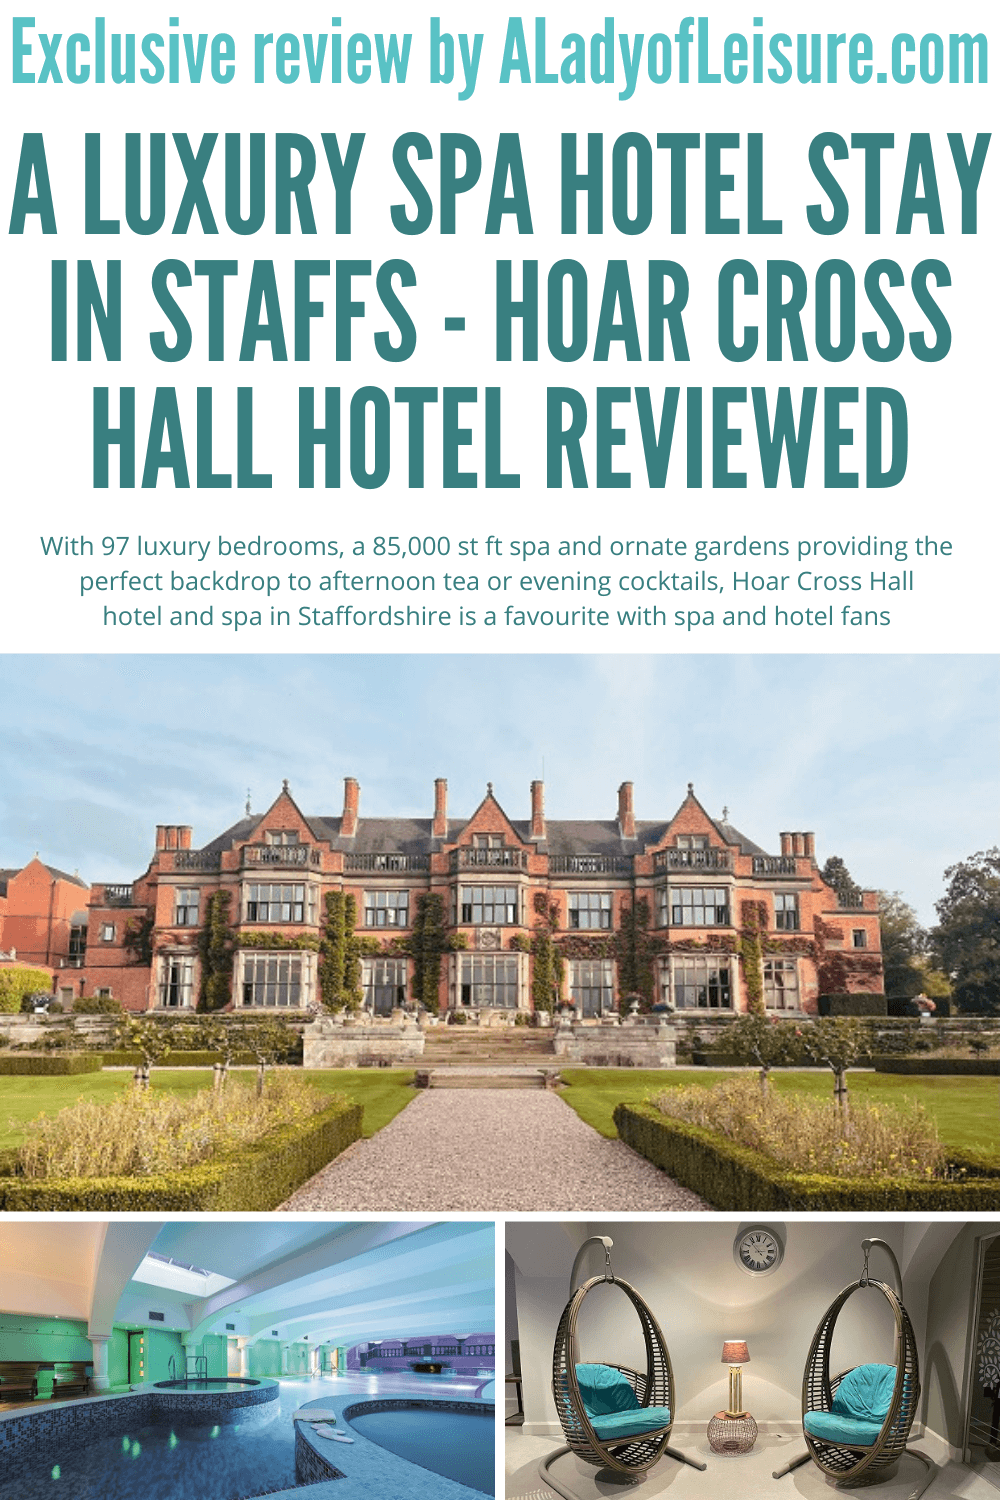 Hoar Cross Hall hotel and spa pinterest pin